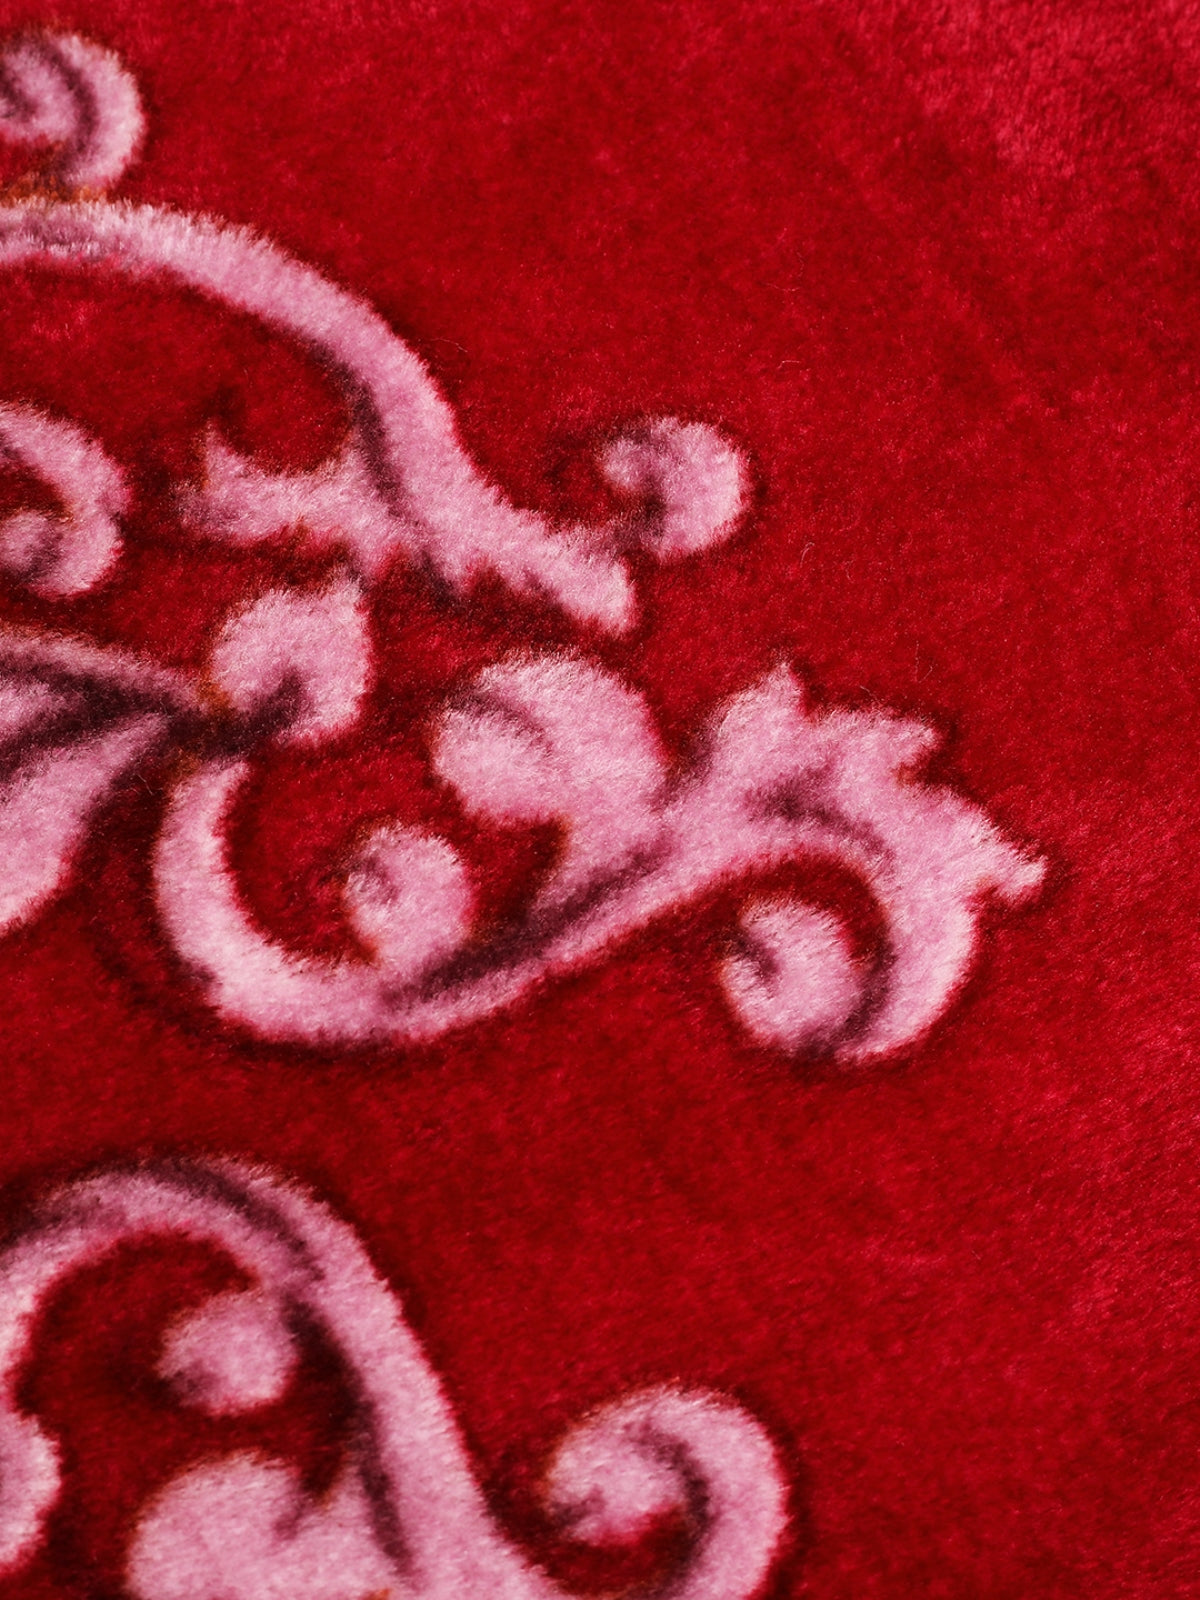 Red Leafy Patterned 200 GSM Double Bed Blanket